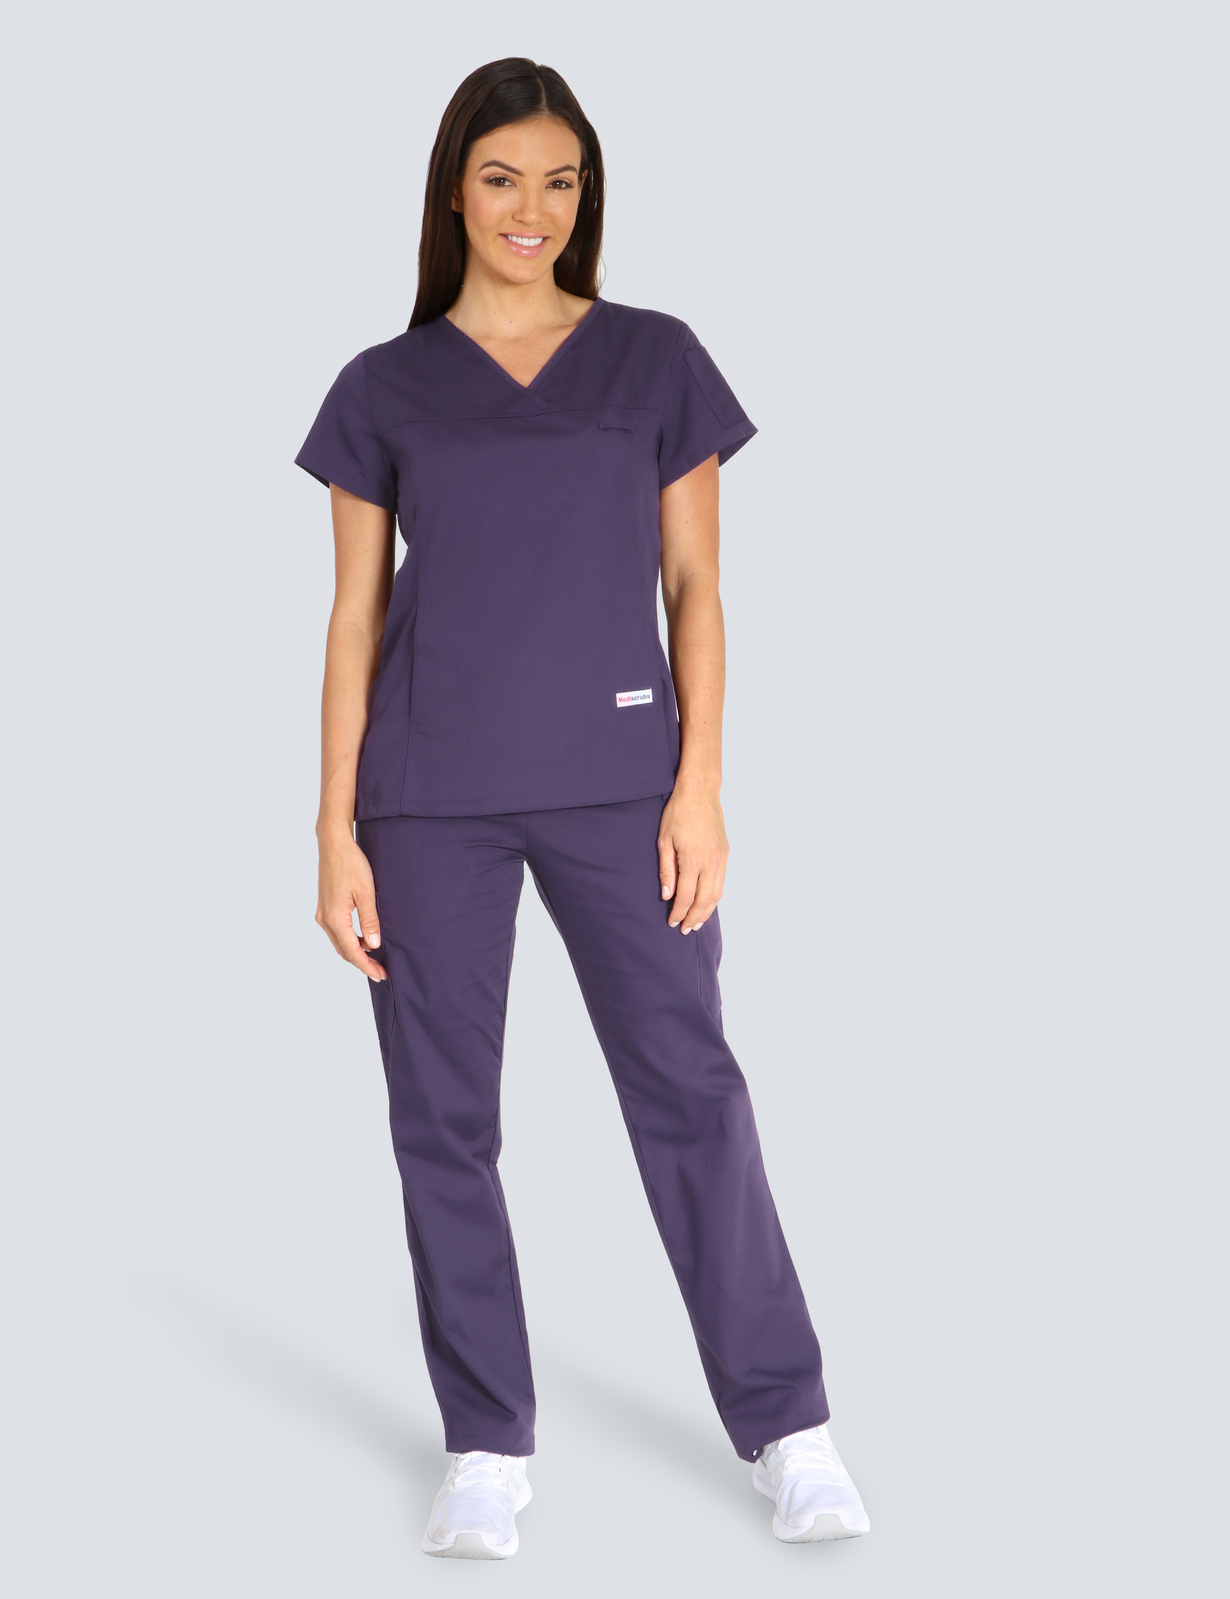 Toowoomba Hospital Administration Officer  Uniform Set Bundle (Wome'ns Fit Solid Top and Cargo Pants in Aubergine incl Logo) 